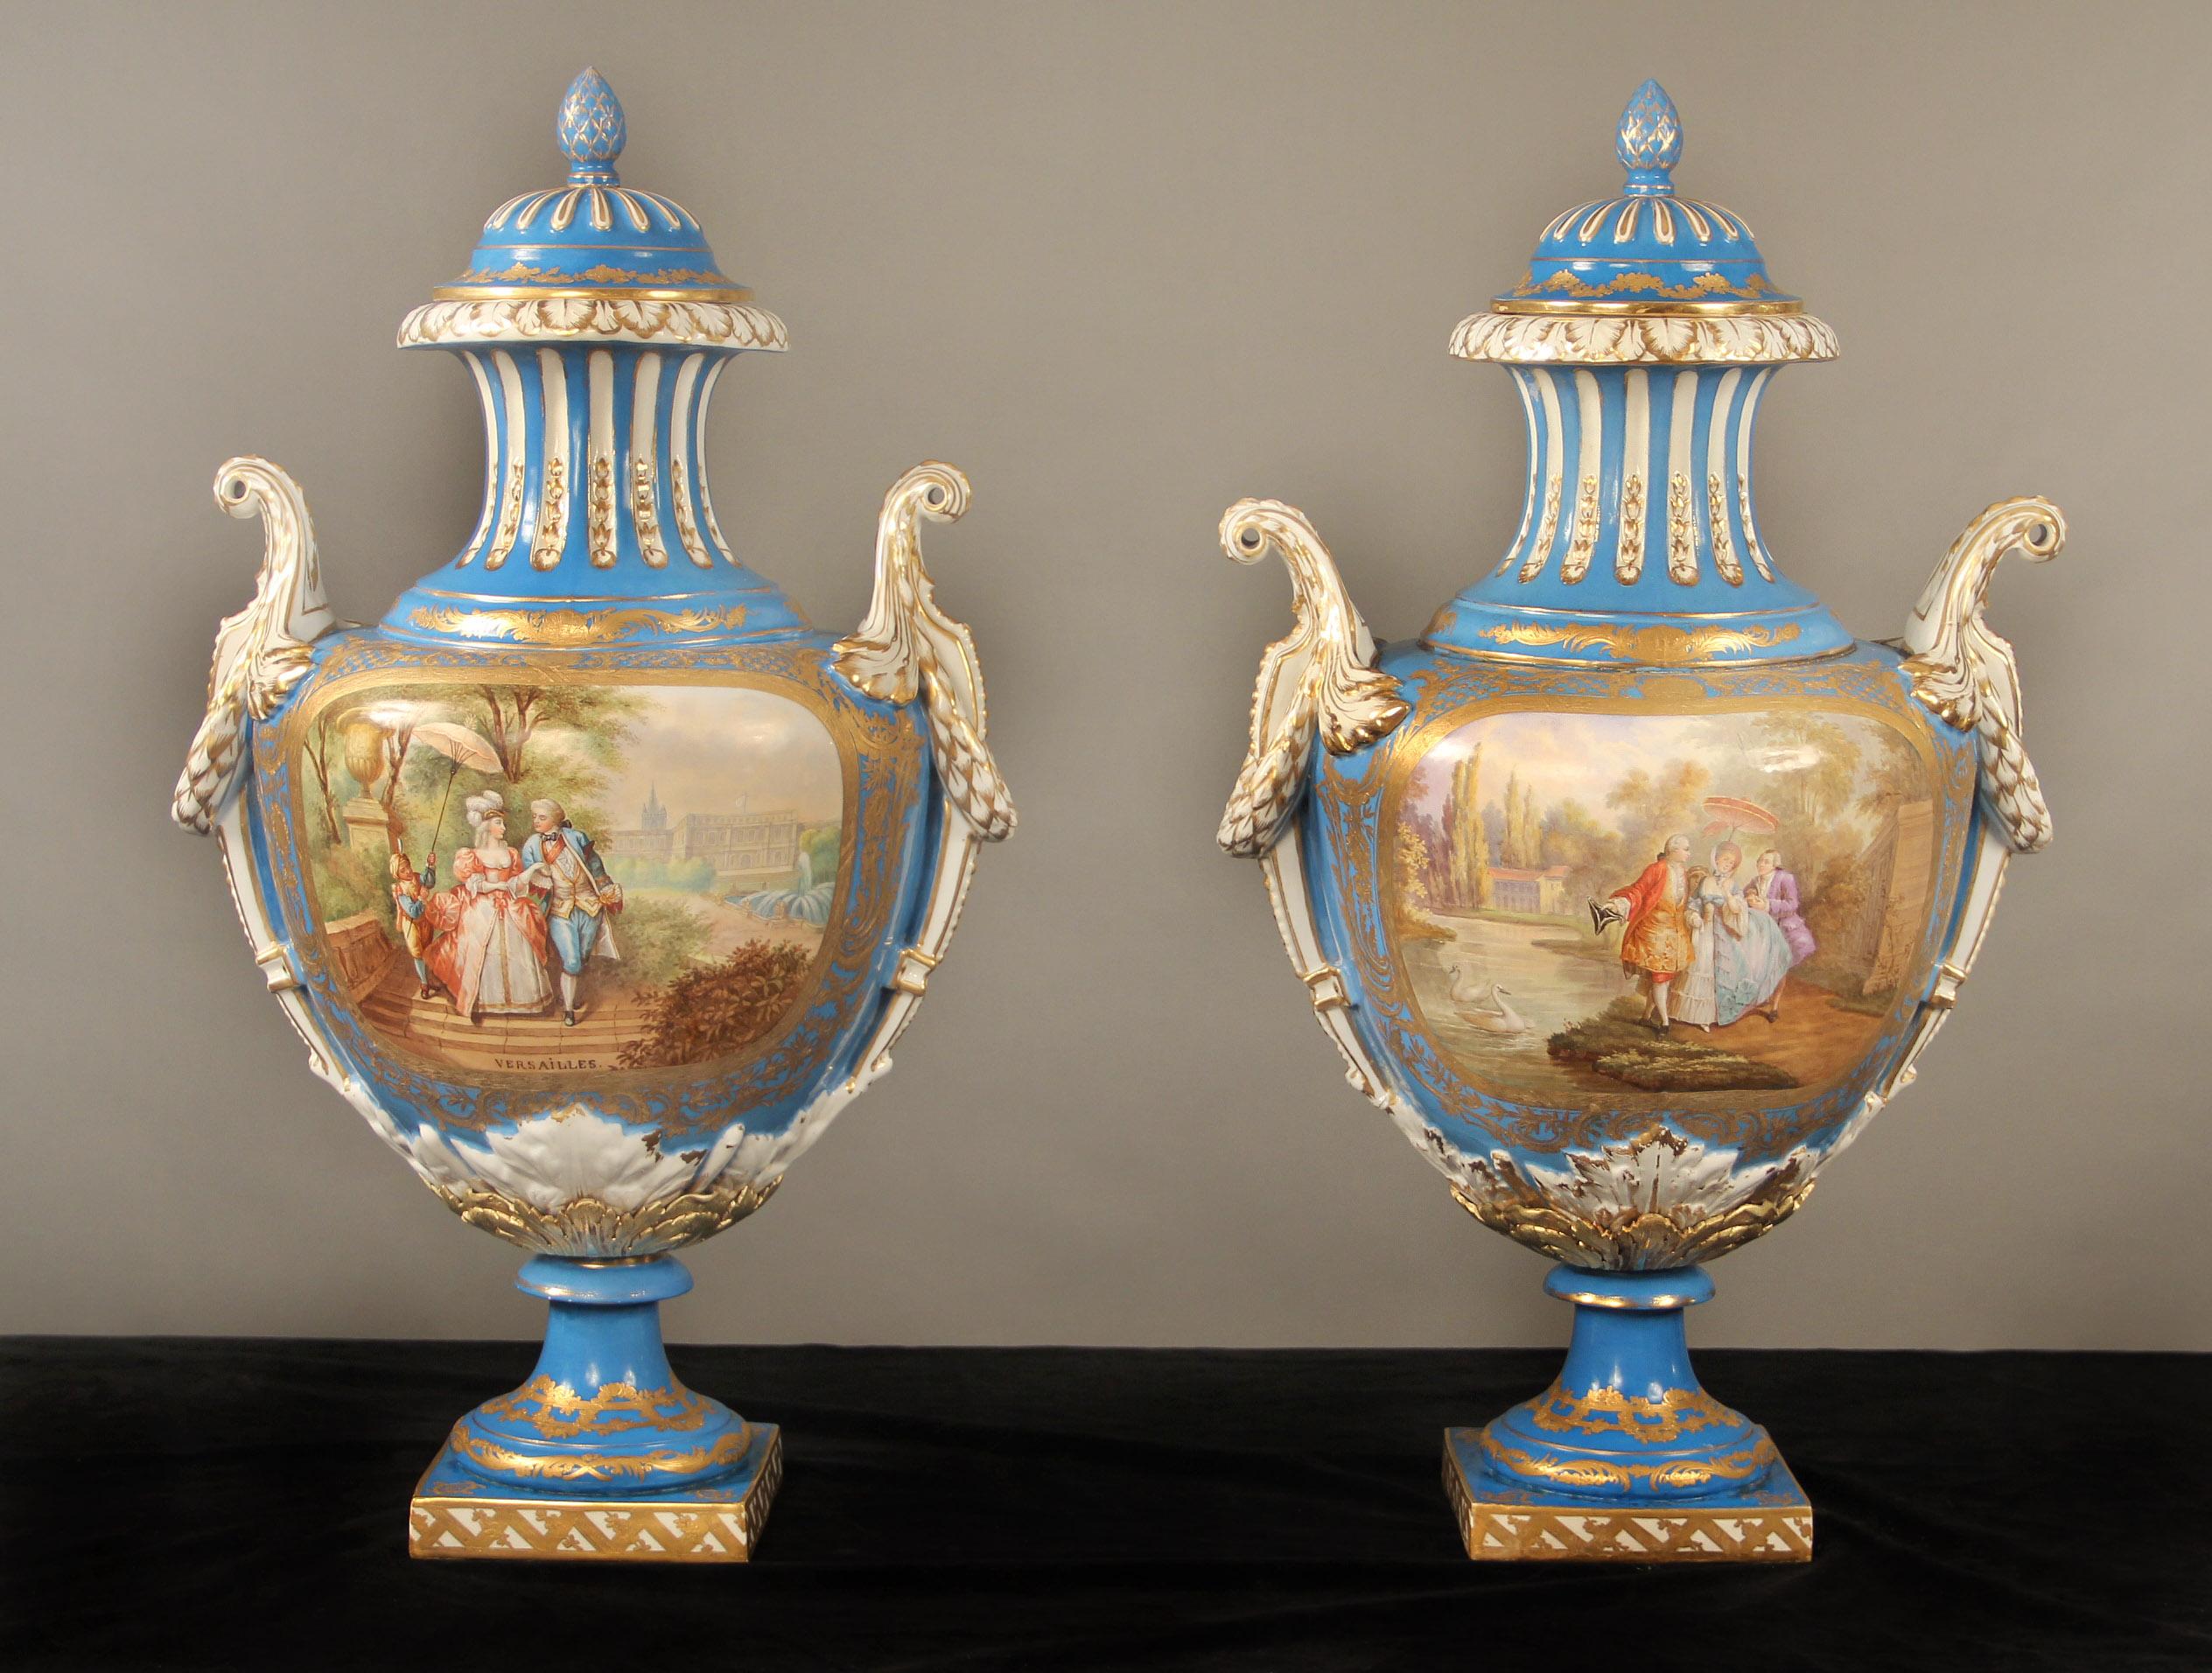 A Lovely Pair of Early 20th Century Gilt Bronze Mounted Turquoise Sèvres Style Porcelain Vases and Covers

Each of baluster form with domed cover with pine cone finial, above a waisted neck and bulbous body finely painted with Watteau-esque scènes